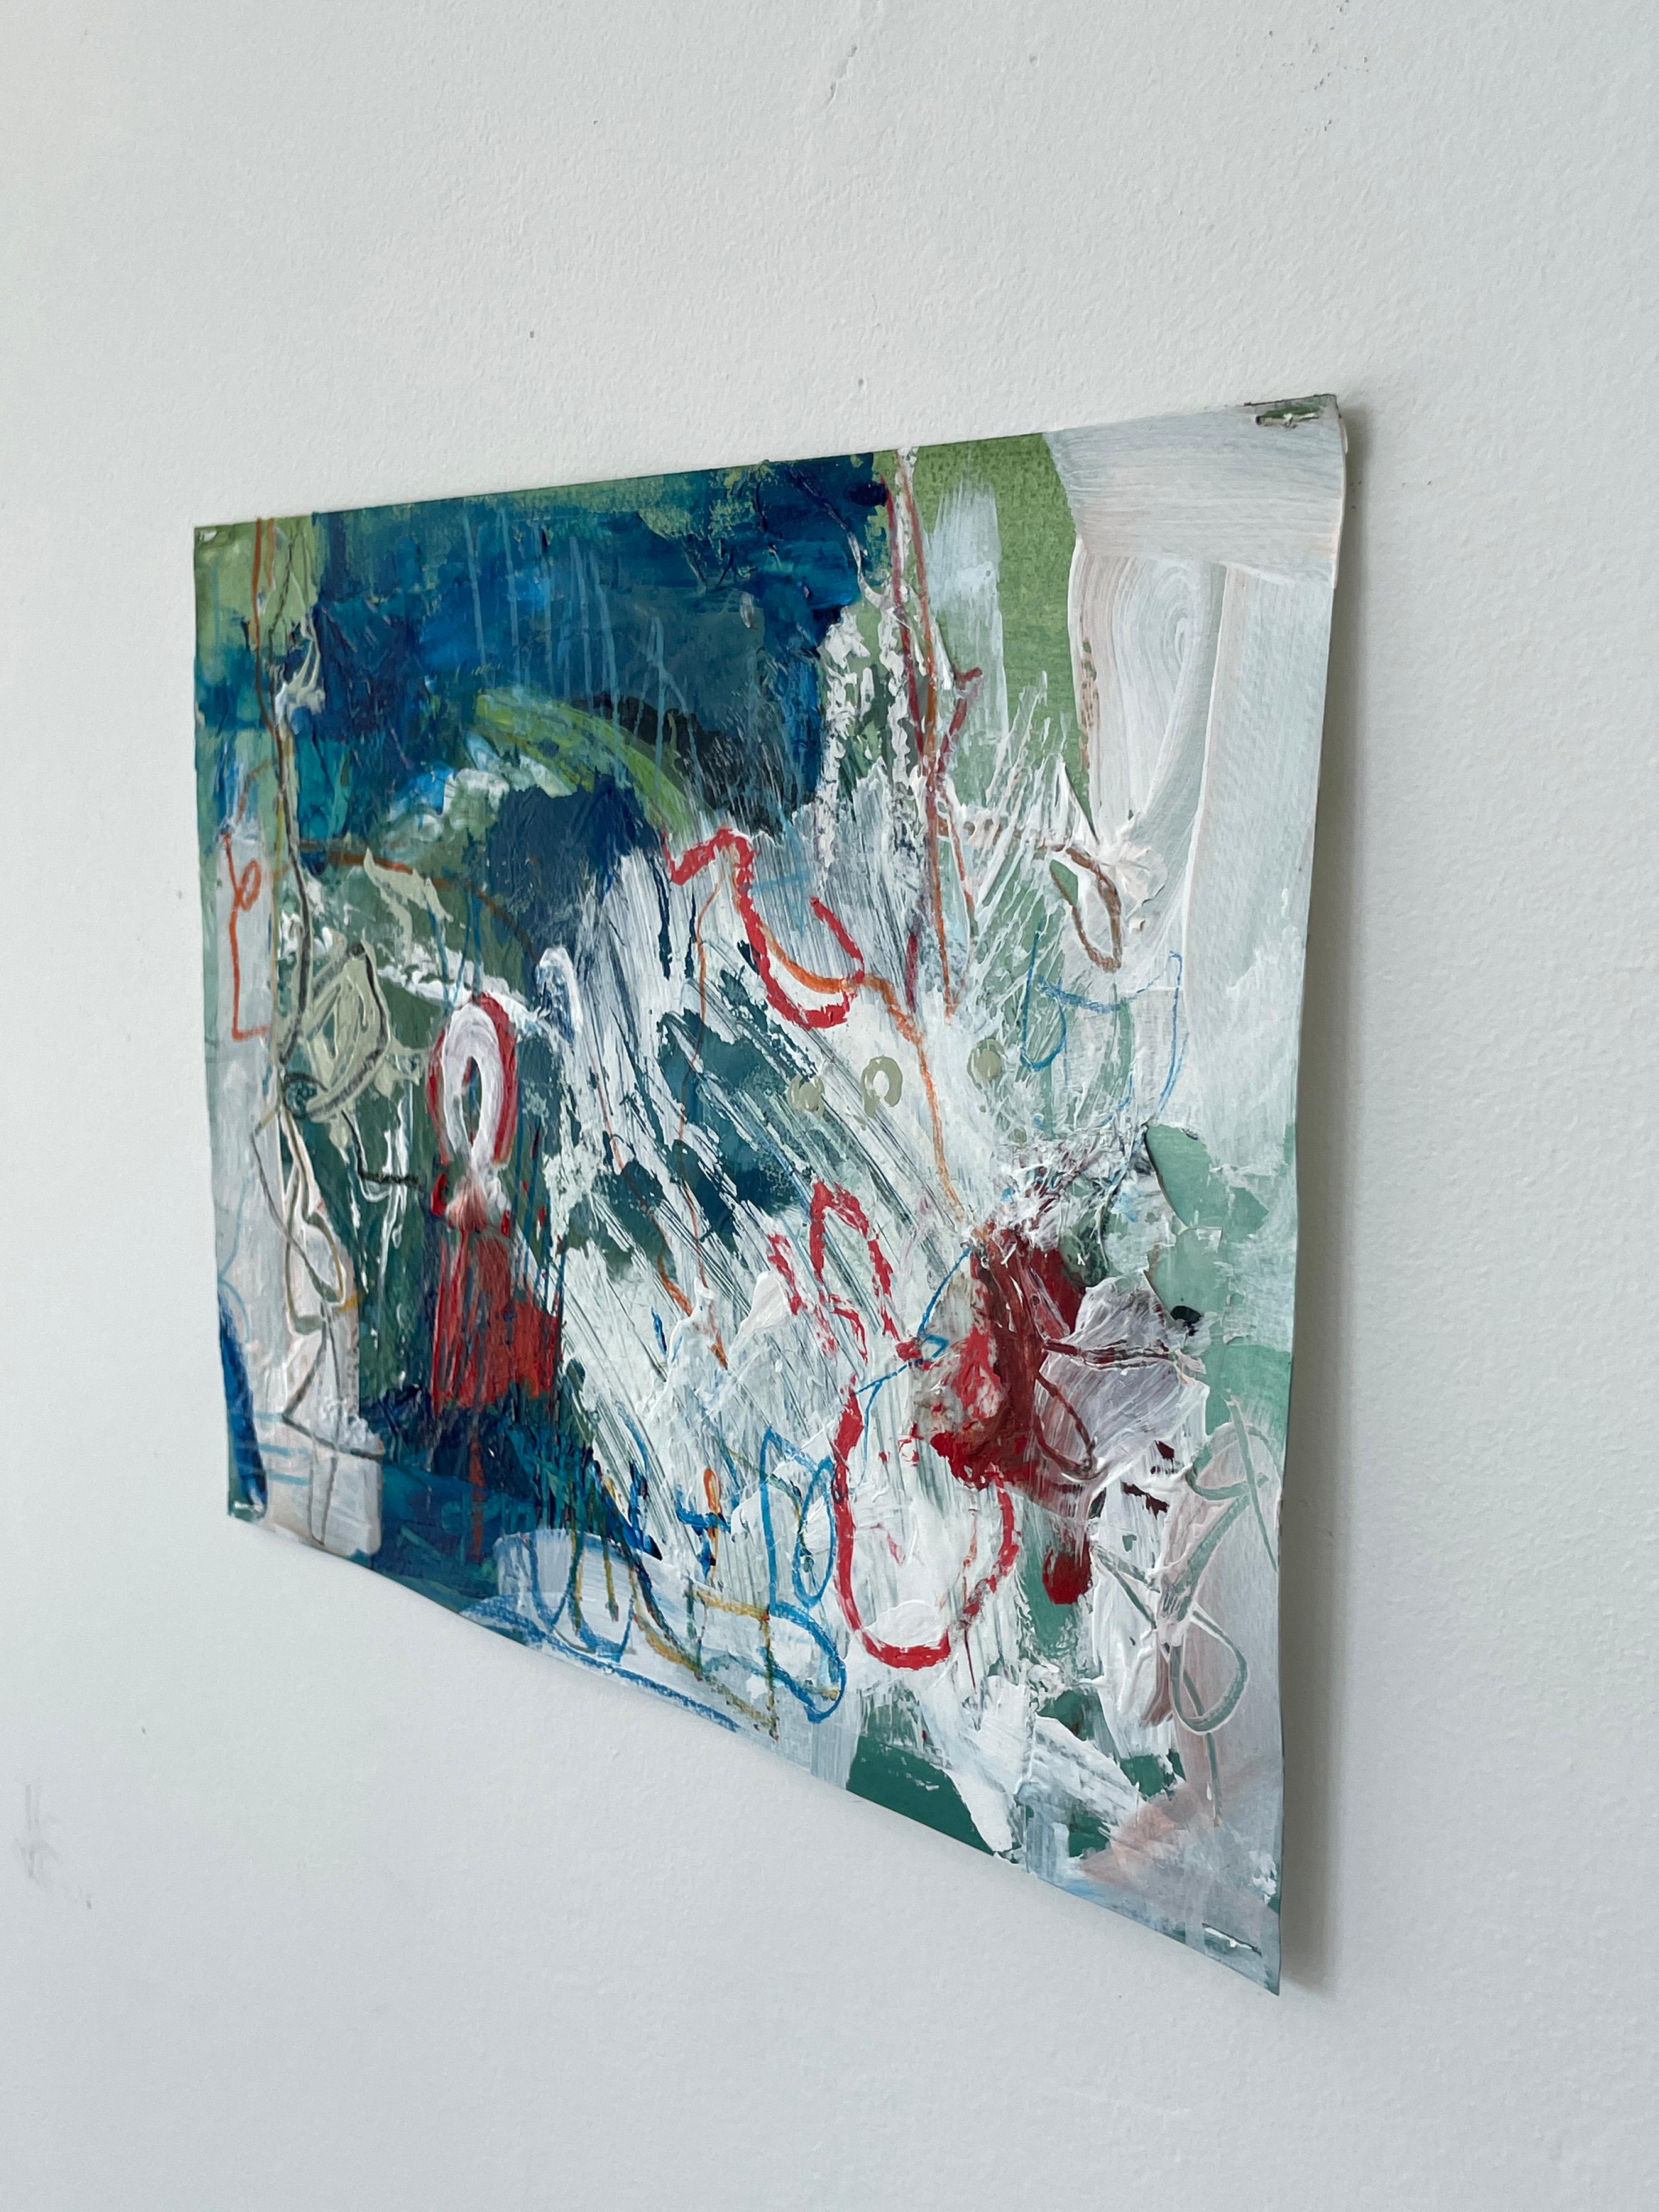 Small Works on Paper, Untitled #12 - Abstract Painting by Stephanie Visser 